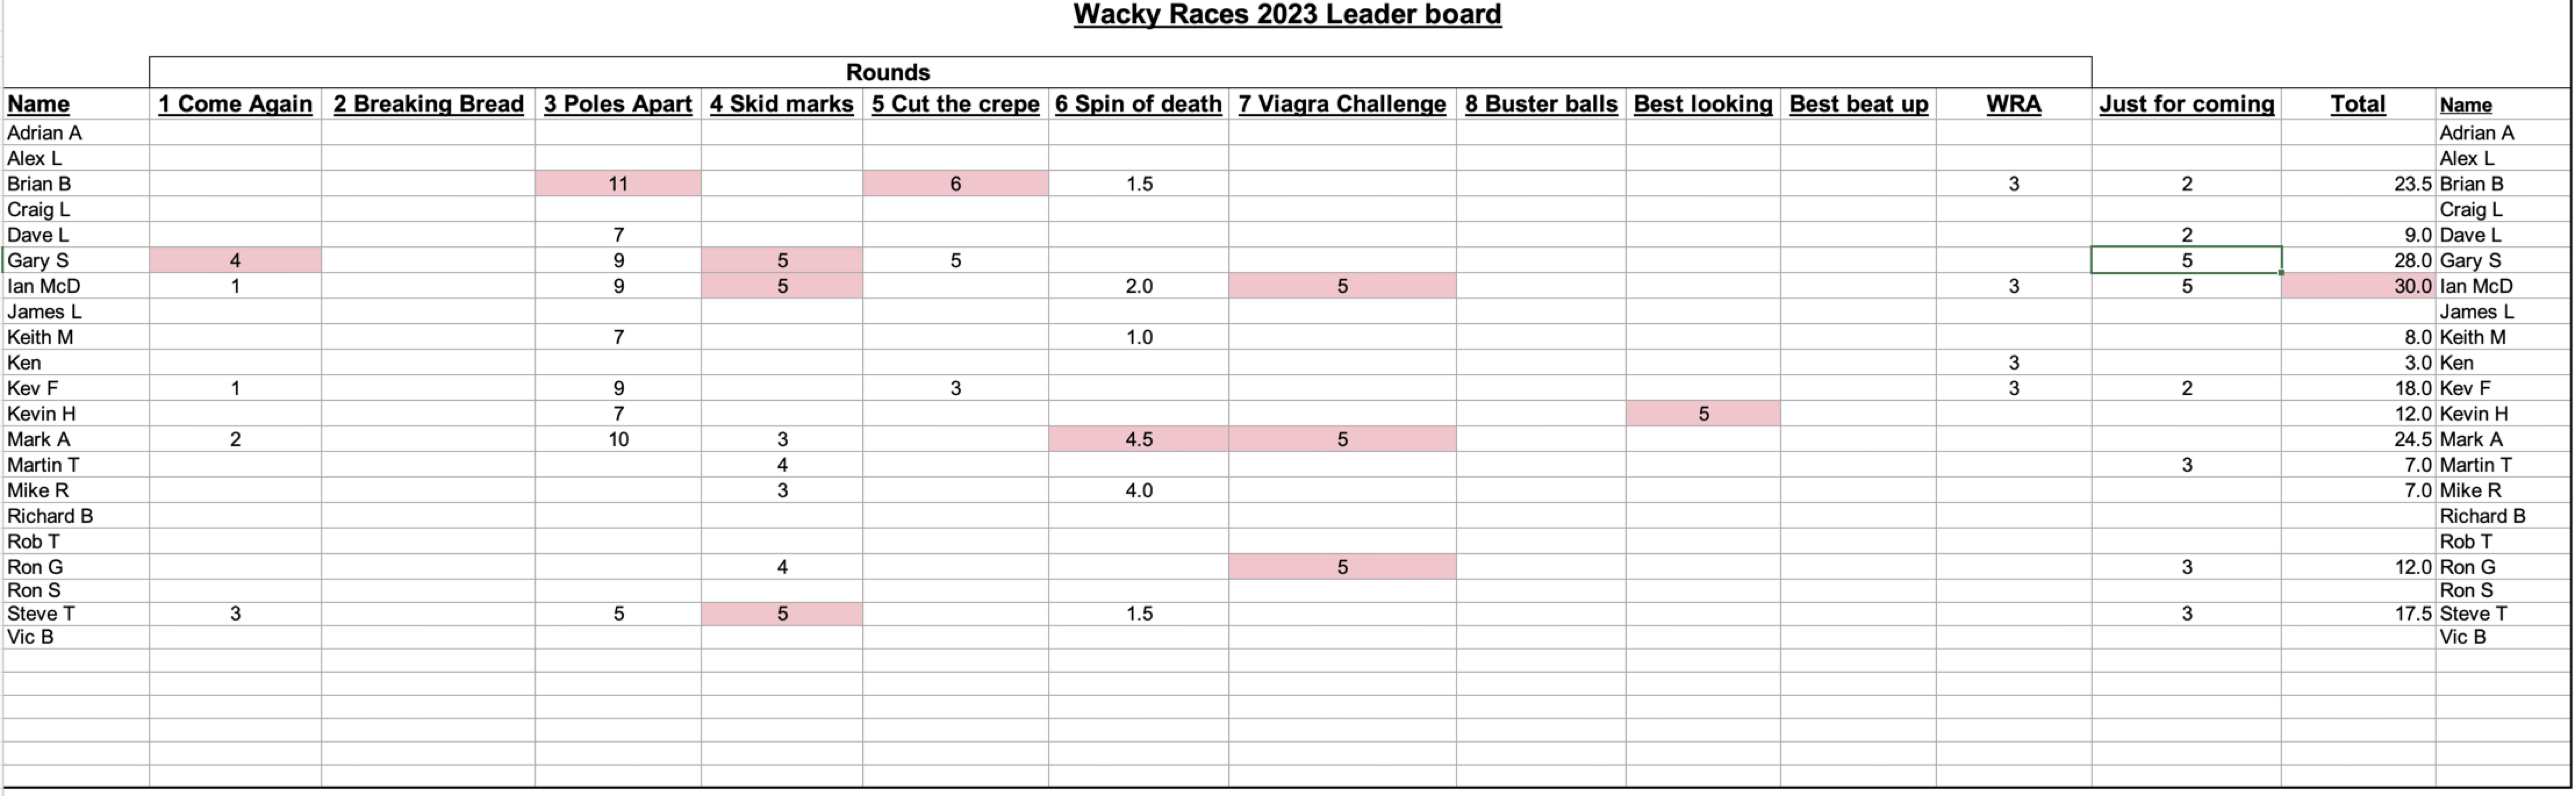 2023 Wacky Races Scorecard. If you don't see the image, try clicking this text.